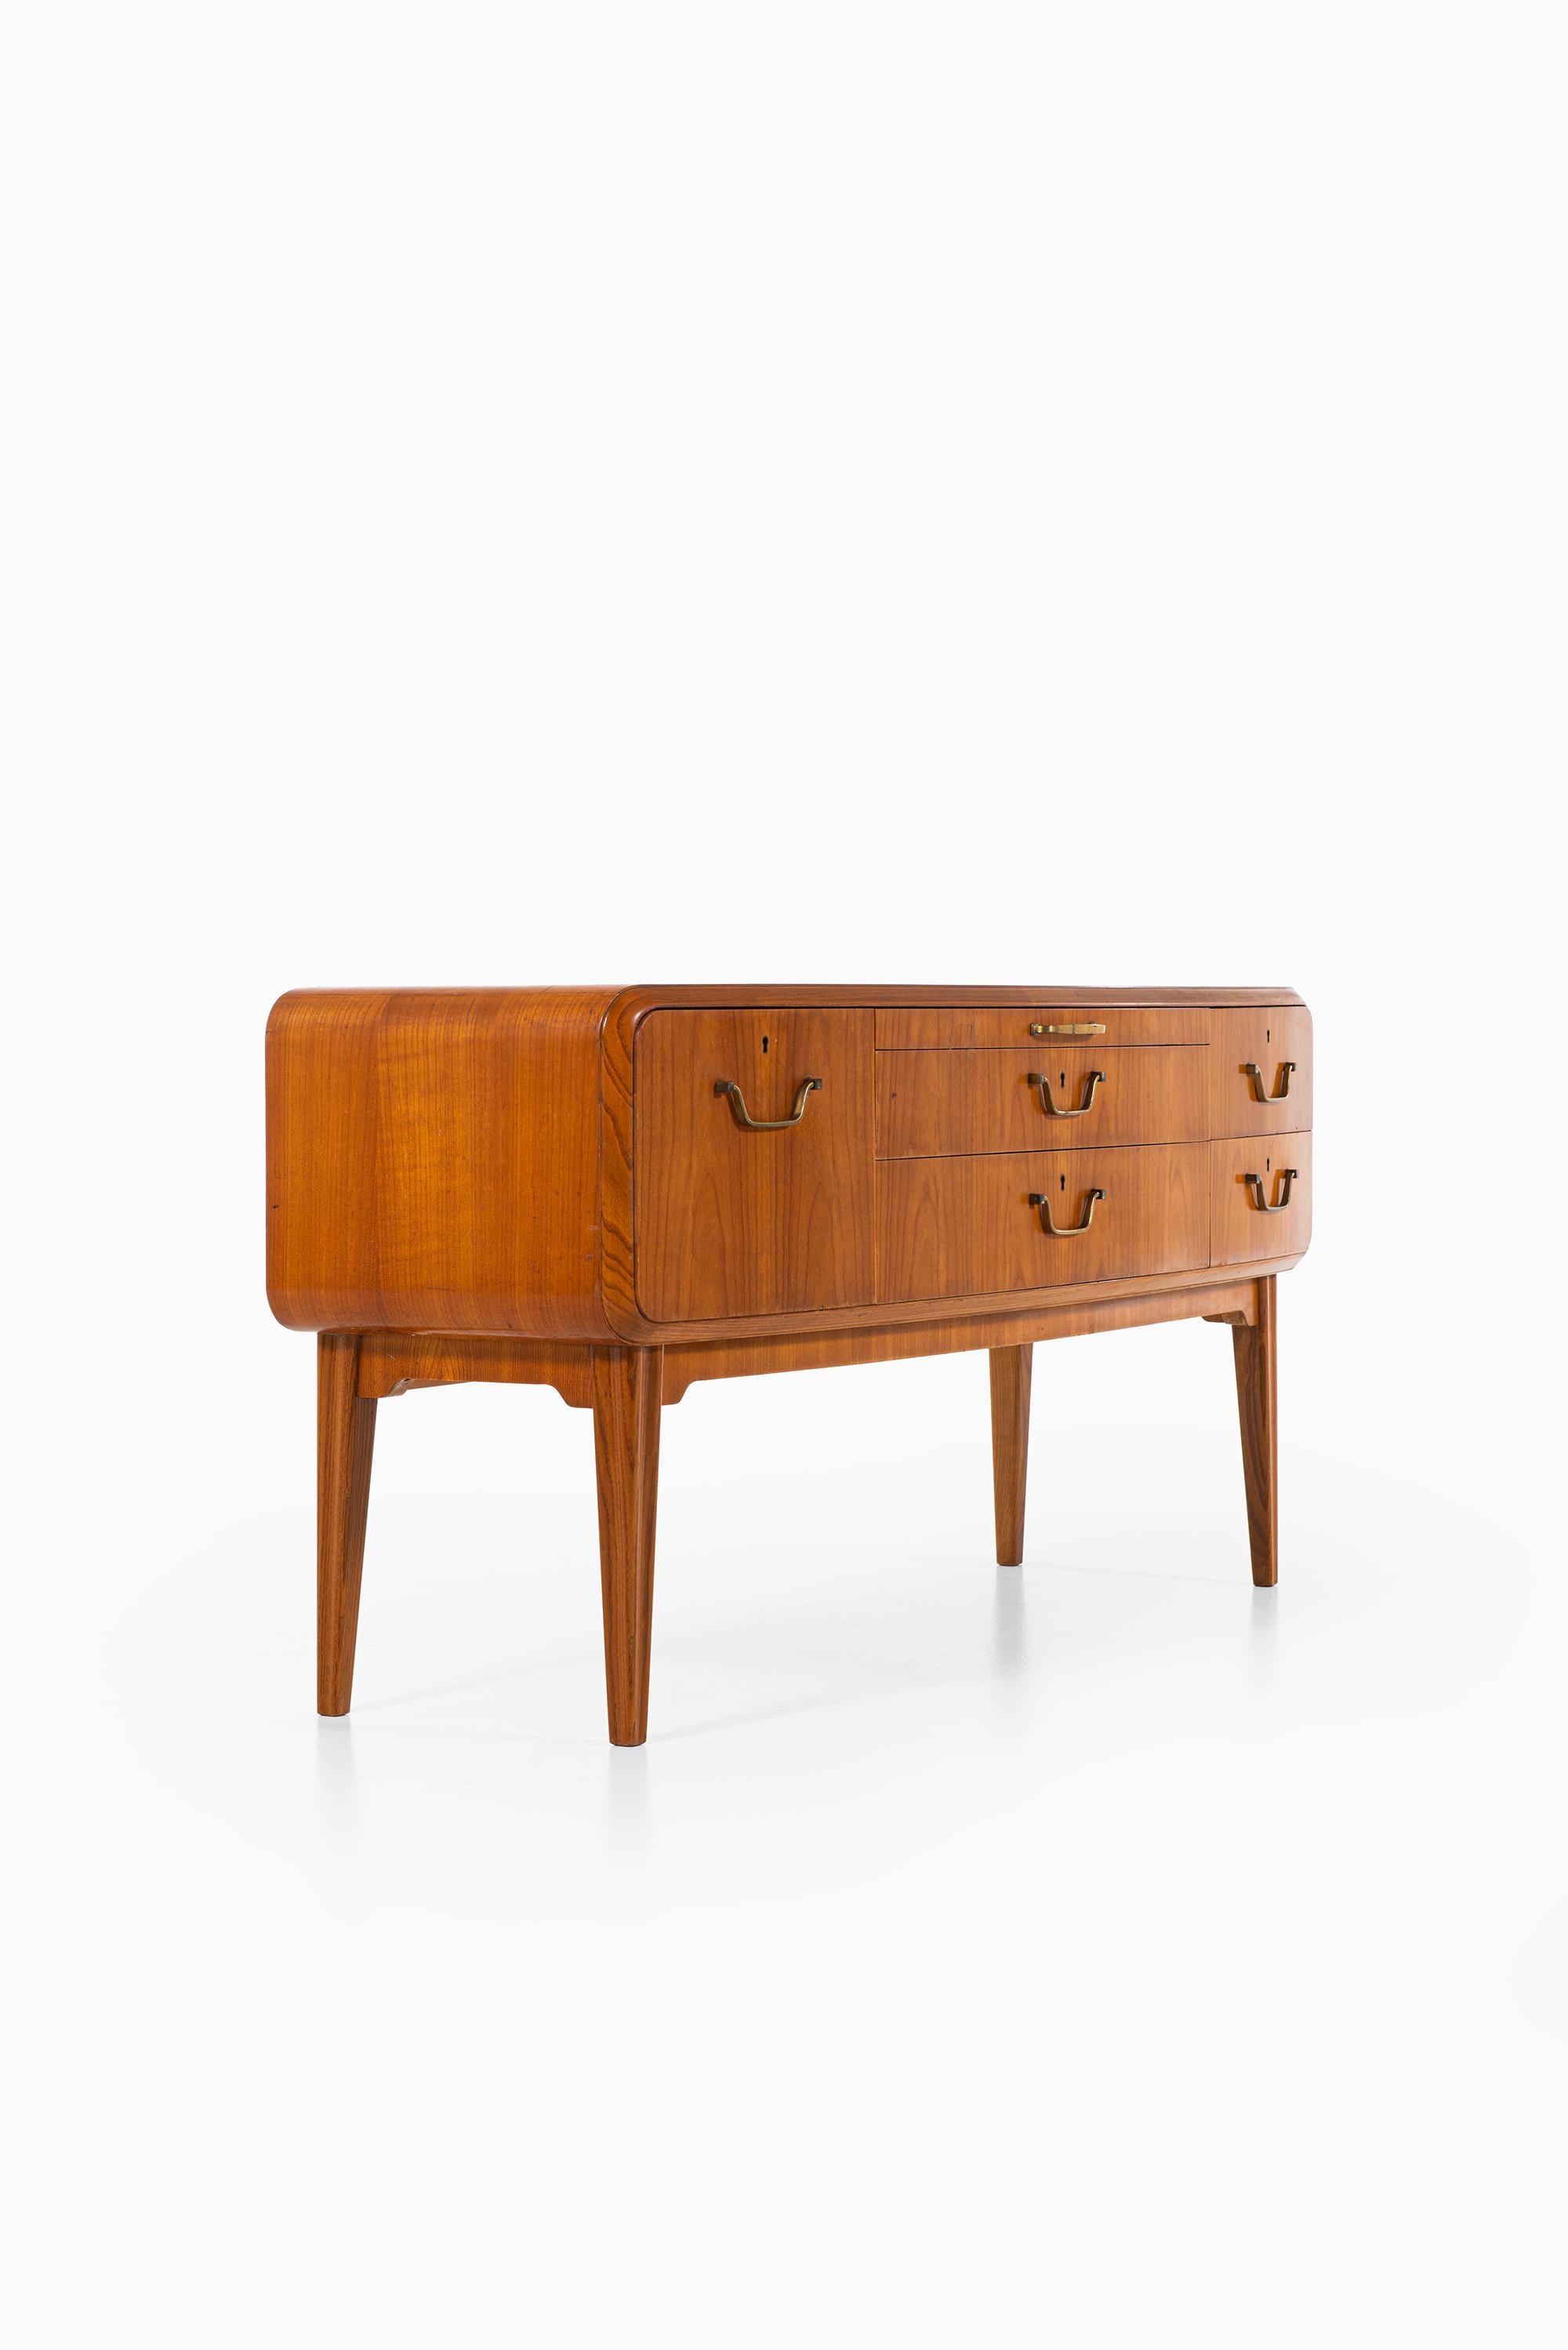 Mid-20th Century Axel Larsson Bureau / Sideboard Produced by Bodafors in Sweden